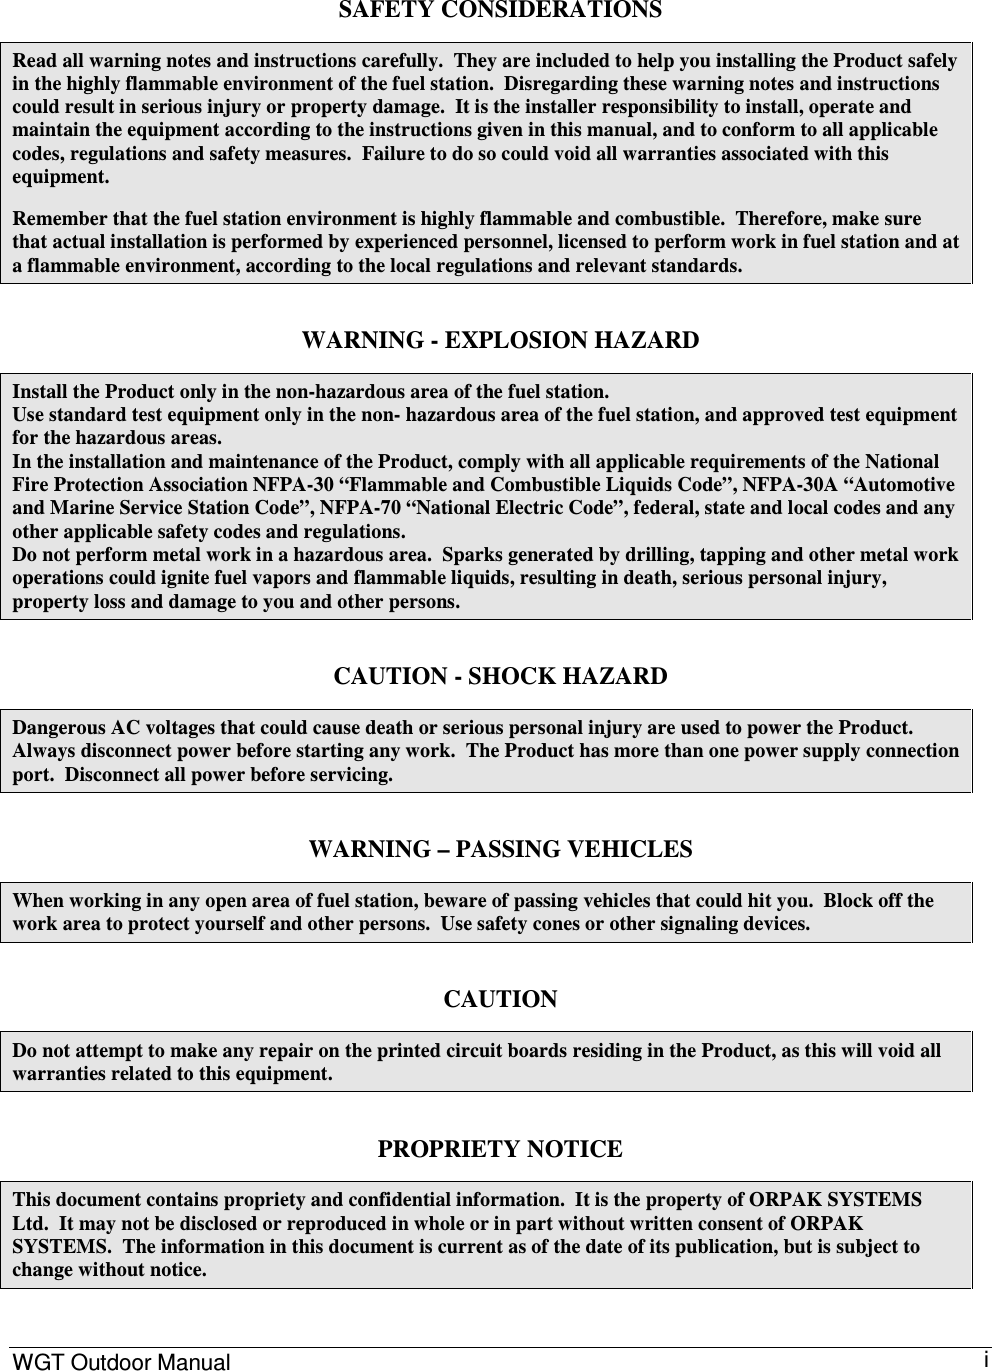 WGT Outdoor Manual      i SAFETY CONSIDERATIONS Read all warning notes and instructions carefully.  They are included to help you installing the Product safely in the highly flammable environment of the fuel station.  Disregarding these warning notes and instructions could result in serious injury or property damage.  It is the installer responsibility to install, operate and maintain the equipment according to the instructions given in this manual, and to conform to all applicable codes, regulations and safety measures.  Failure to do so could void all warranties associated with this equipment. Remember that the fuel station environment is highly flammable and combustible.  Therefore, make sure that actual installation is performed by experienced personnel, licensed to perform work in fuel station and at a flammable environment, according to the local regulations and relevant standards. WARNING - EXPLOSION HAZARD Install the Product only in the non-hazardous area of the fuel station. Use standard test equipment only in the non- hazardous area of the fuel station, and approved test equipment for the hazardous areas. In the installation and maintenance of the Product, comply with all applicable requirements of the National Fire Protection Association NFPA-30 “Flammable and Combustible Liquids Code”, NFPA-30A “Automotive and Marine Service Station Code”, NFPA-70 “National Electric Code”, federal, state and local codes and any other applicable safety codes and regulations. Do not perform metal work in a hazardous area.  Sparks generated by drilling, tapping and other metal work operations could ignite fuel vapors and flammable liquids, resulting in death, serious personal injury, property loss and damage to you and other persons. CAUTION - SHOCK HAZARD Dangerous AC voltages that could cause death or serious personal injury are used to power the Product.  Always disconnect power before starting any work.  The Product has more than one power supply connection port.  Disconnect all power before servicing.  WARNING – PASSING VEHICLES When working in any open area of fuel station, beware of passing vehicles that could hit you.  Block off the work area to protect yourself and other persons.  Use safety cones or other signaling devices. CAUTION Do not attempt to make any repair on the printed circuit boards residing in the Product, as this will void all warranties related to this equipment. PROPRIETY NOTICE This document contains propriety and confidential information.  It is the property of ORPAK SYSTEMS Ltd.  It may not be disclosed or reproduced in whole or in part without written consent of ORPAK SYSTEMS.  The information in this document is current as of the date of its publication, but is subject to change without notice. 